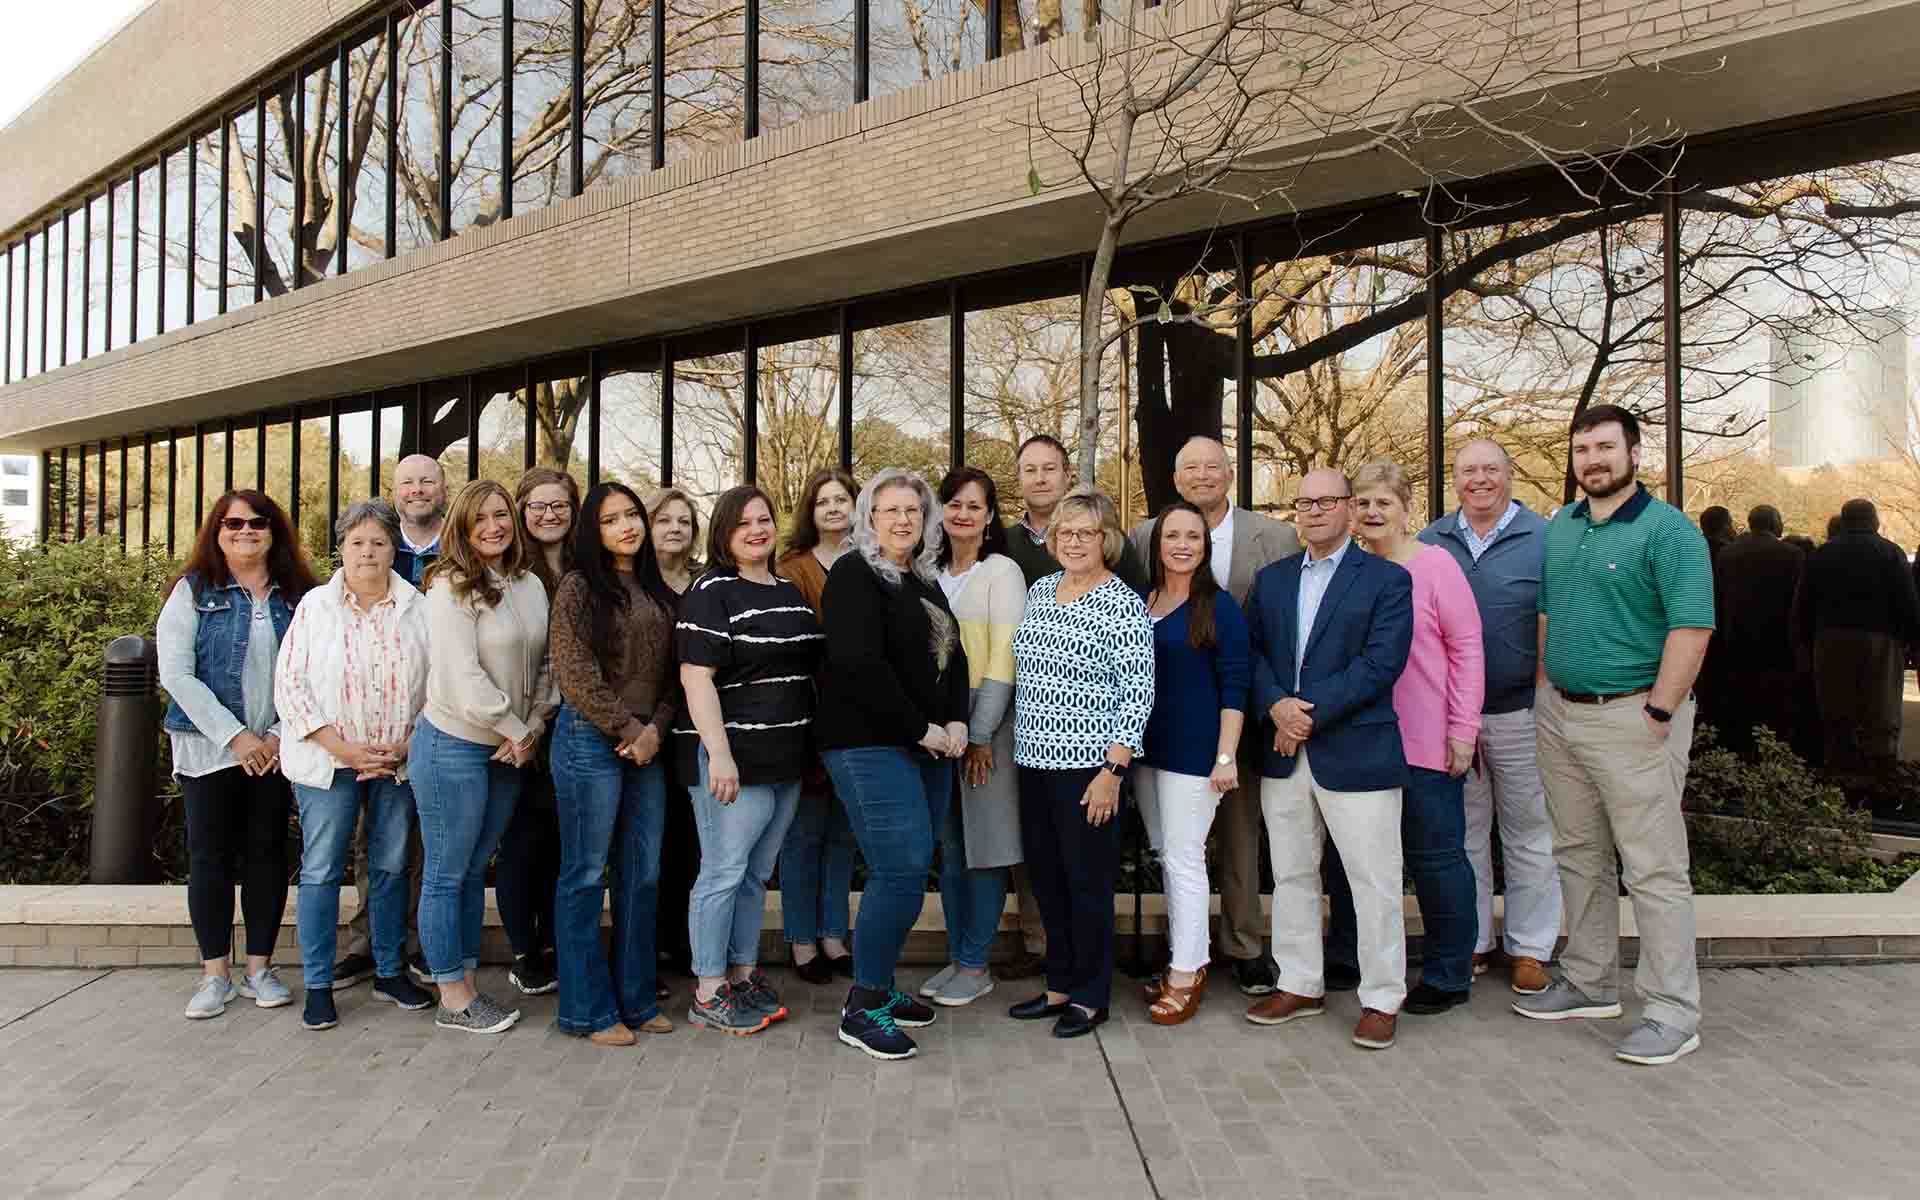 Homepage - Boyle Insurance Agency Team Members Standing Outside in Front of the Office As They Smiling and Pose Together for a Photo on a Nice Day